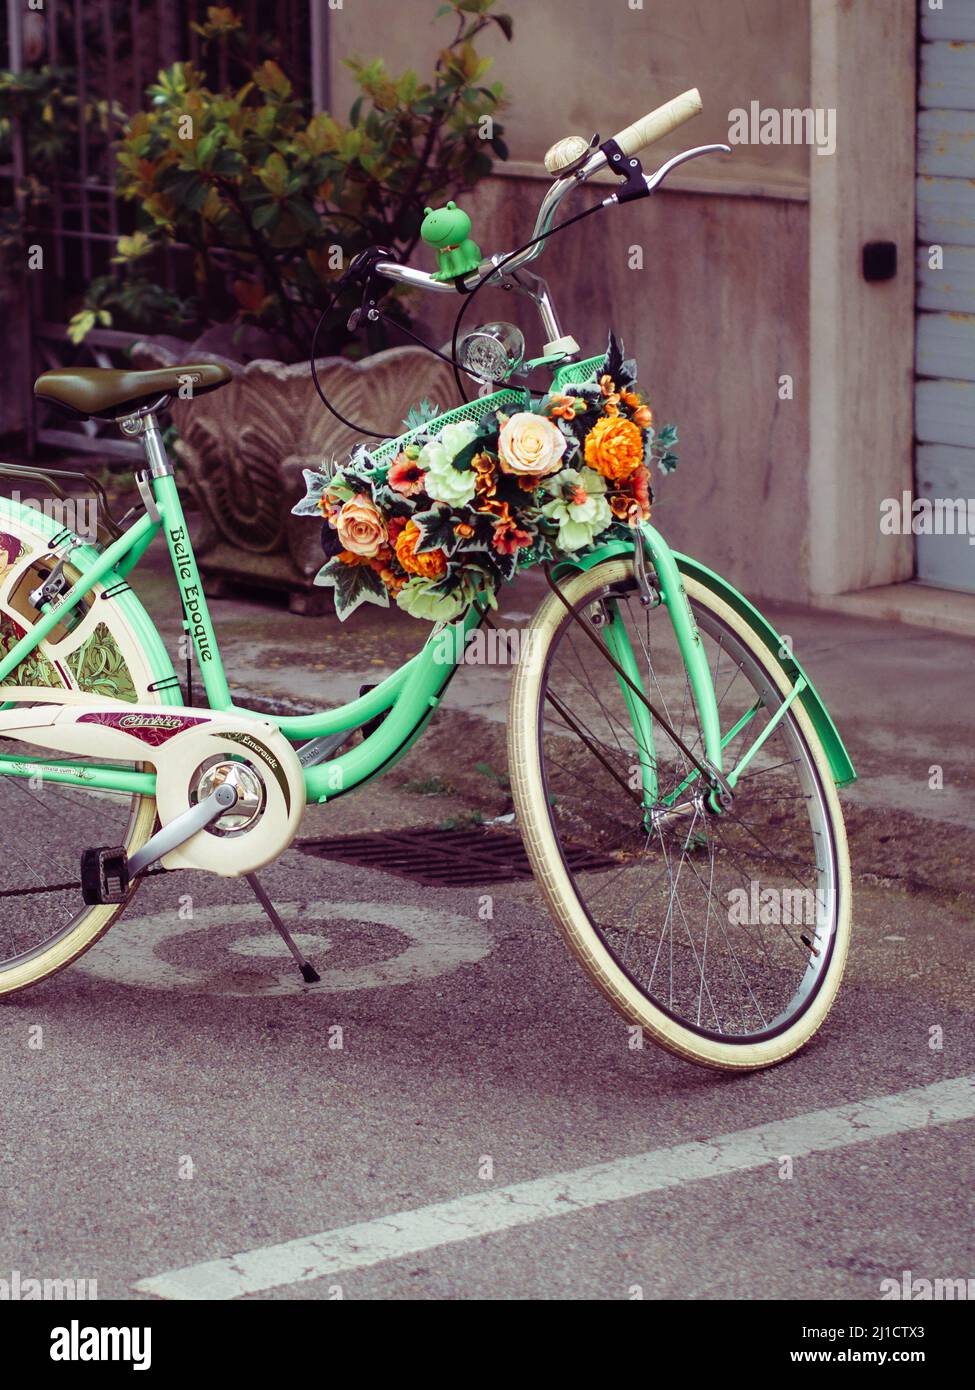 Mint bike with bunch of flowers in the basket Stock Photo